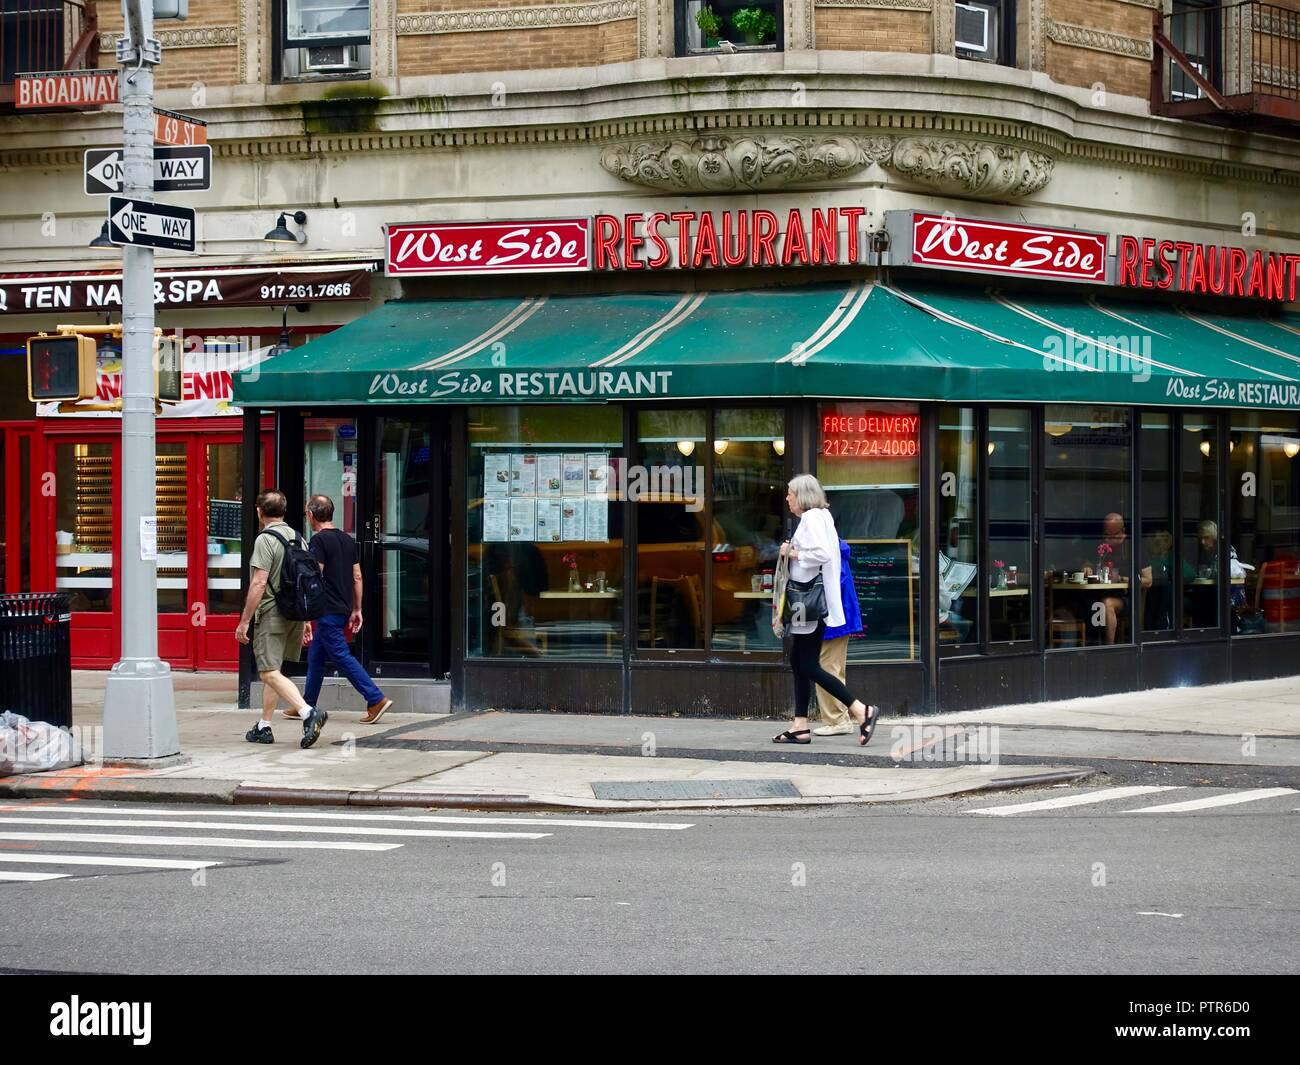 Upper West Side Restaurant High Resolution Stock Photography and Images -  Alamy